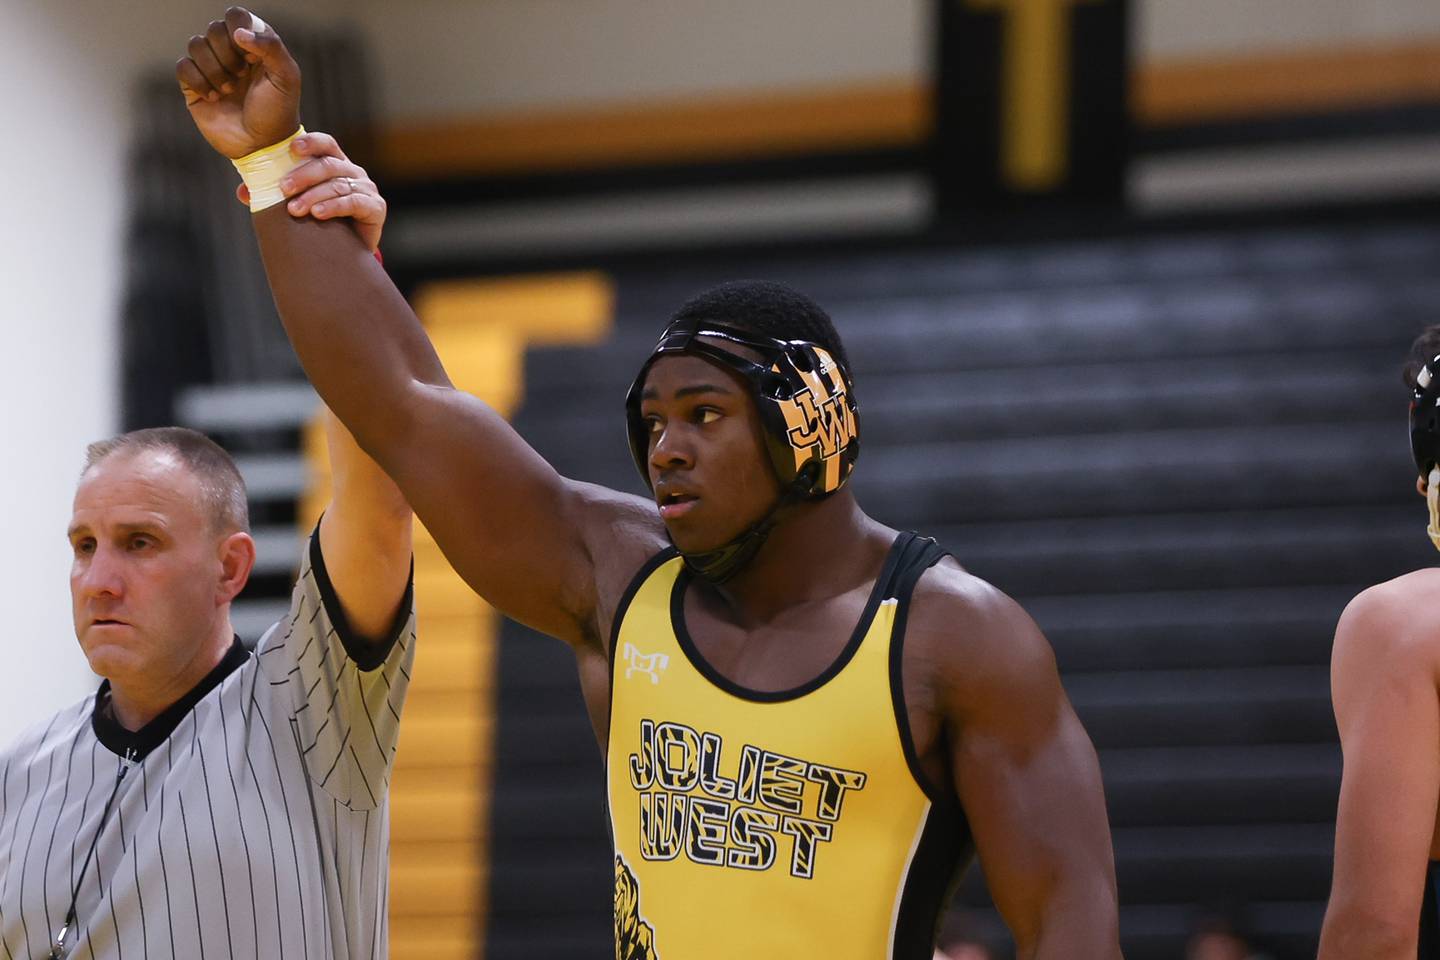 Joliet West’s Bryan McCoy wins by fall against Lincoln-Way East in the 220lb. match. Thursday, Jan. 27, 2022 in Joliet.